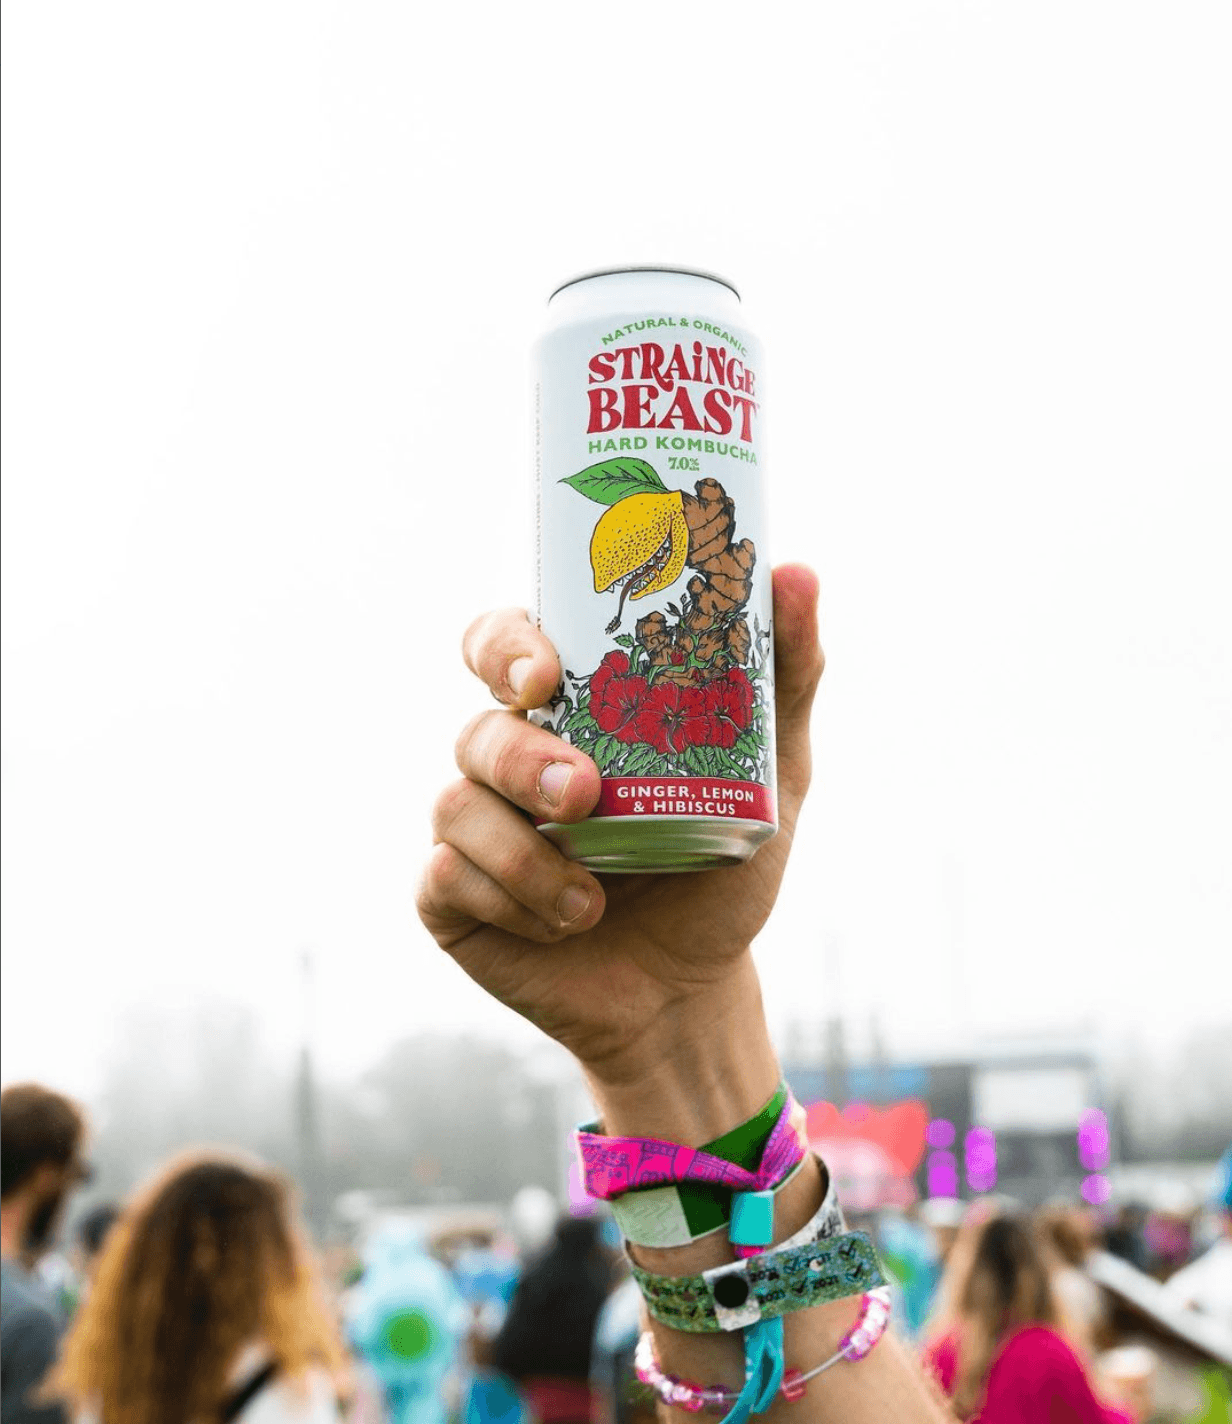 Hand holding can of Strainge Beast at a festival